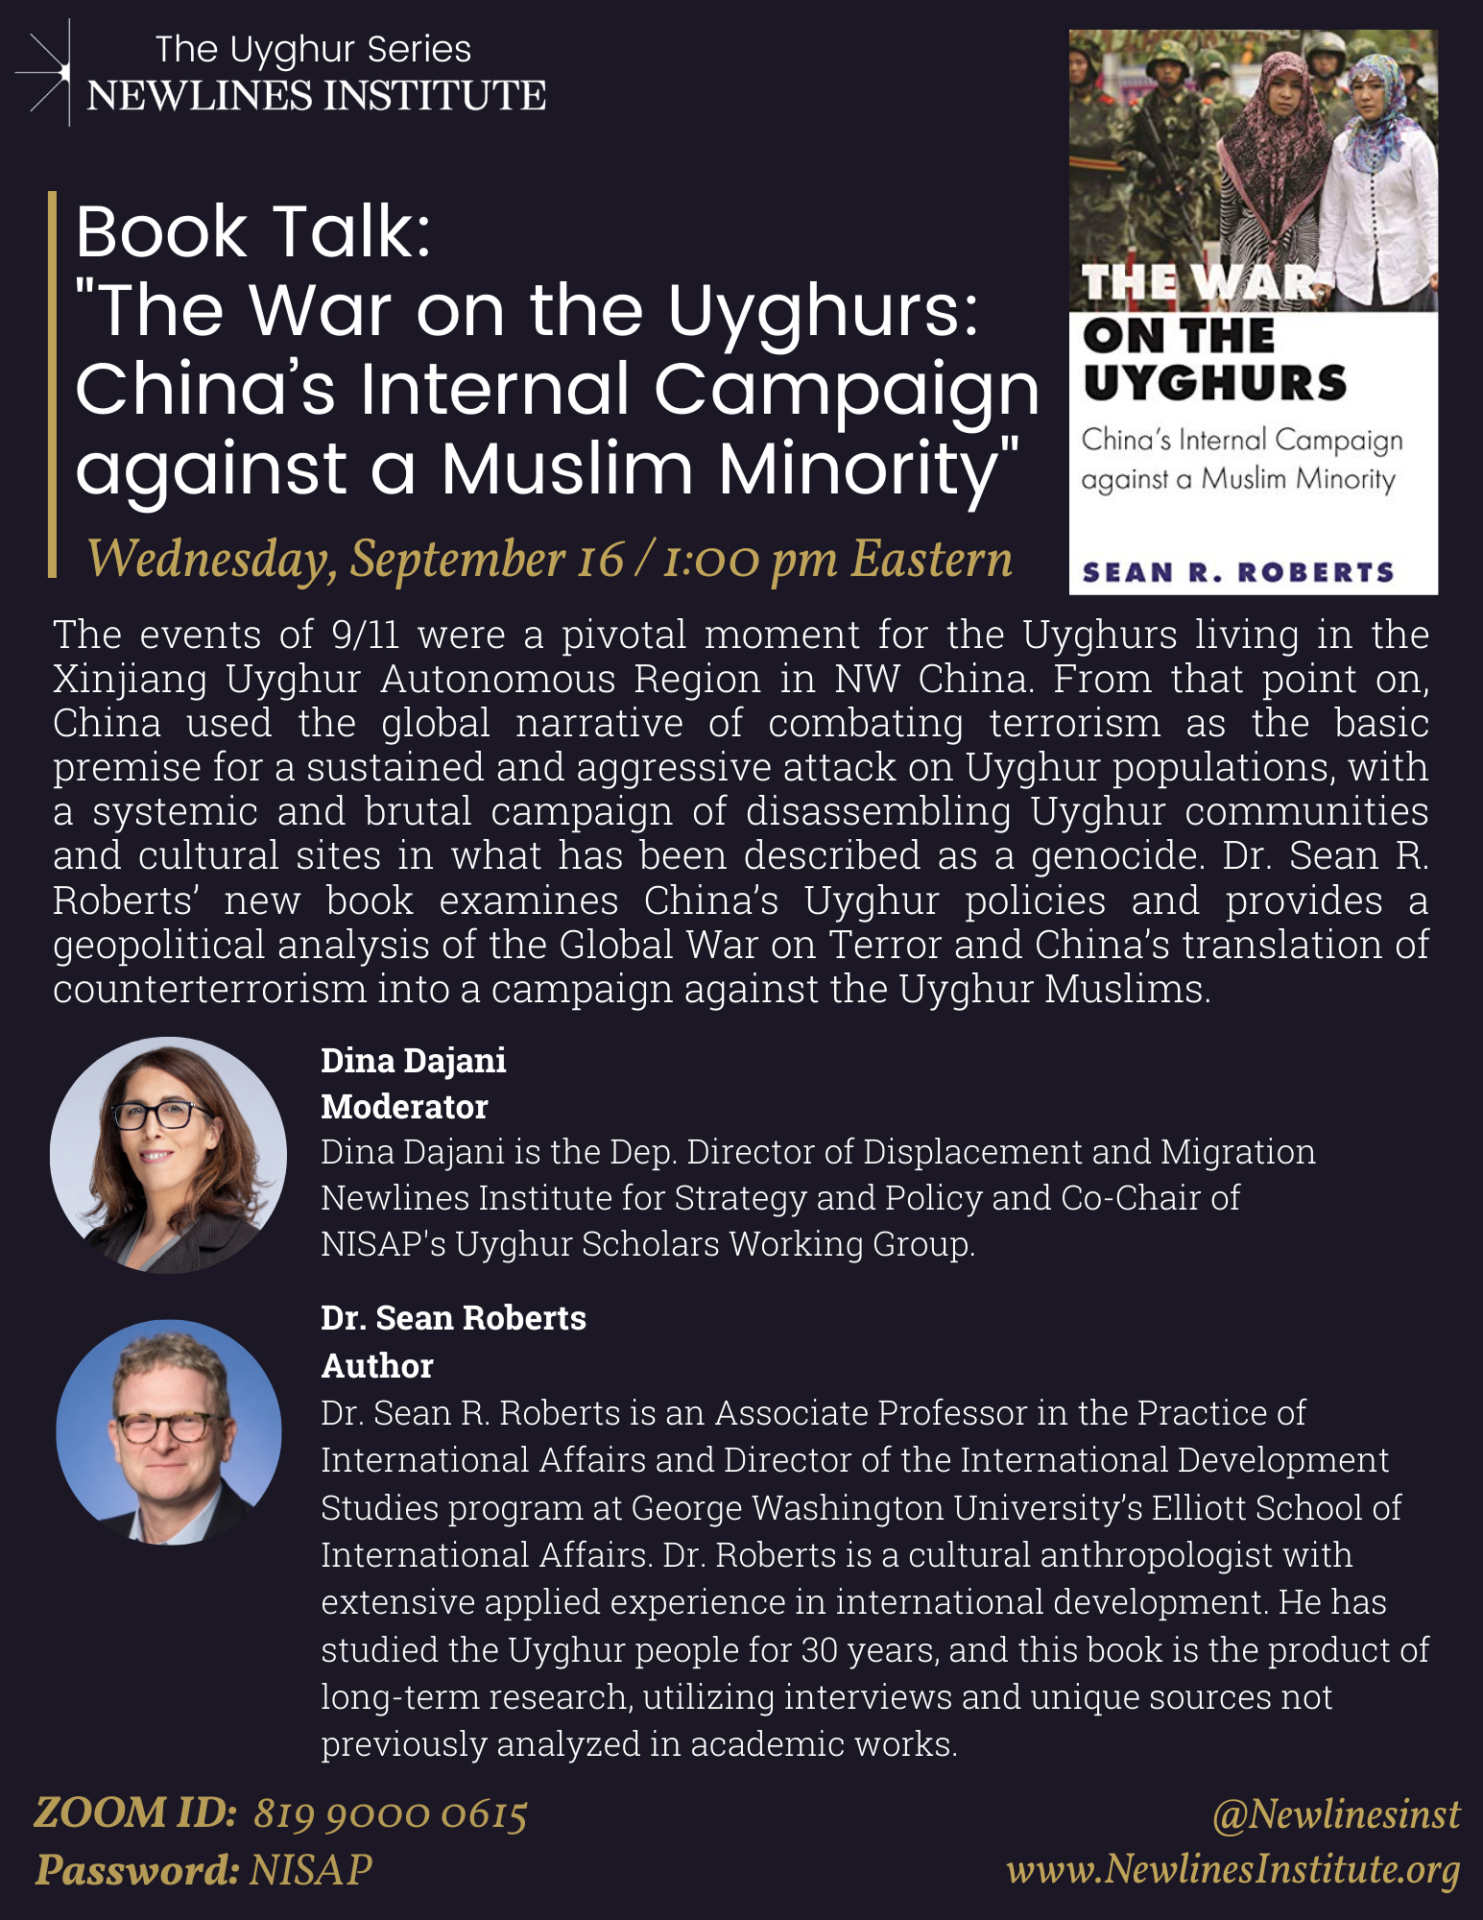 The War on the Uyghurs: Book Talk with Dr. Sean Roberts